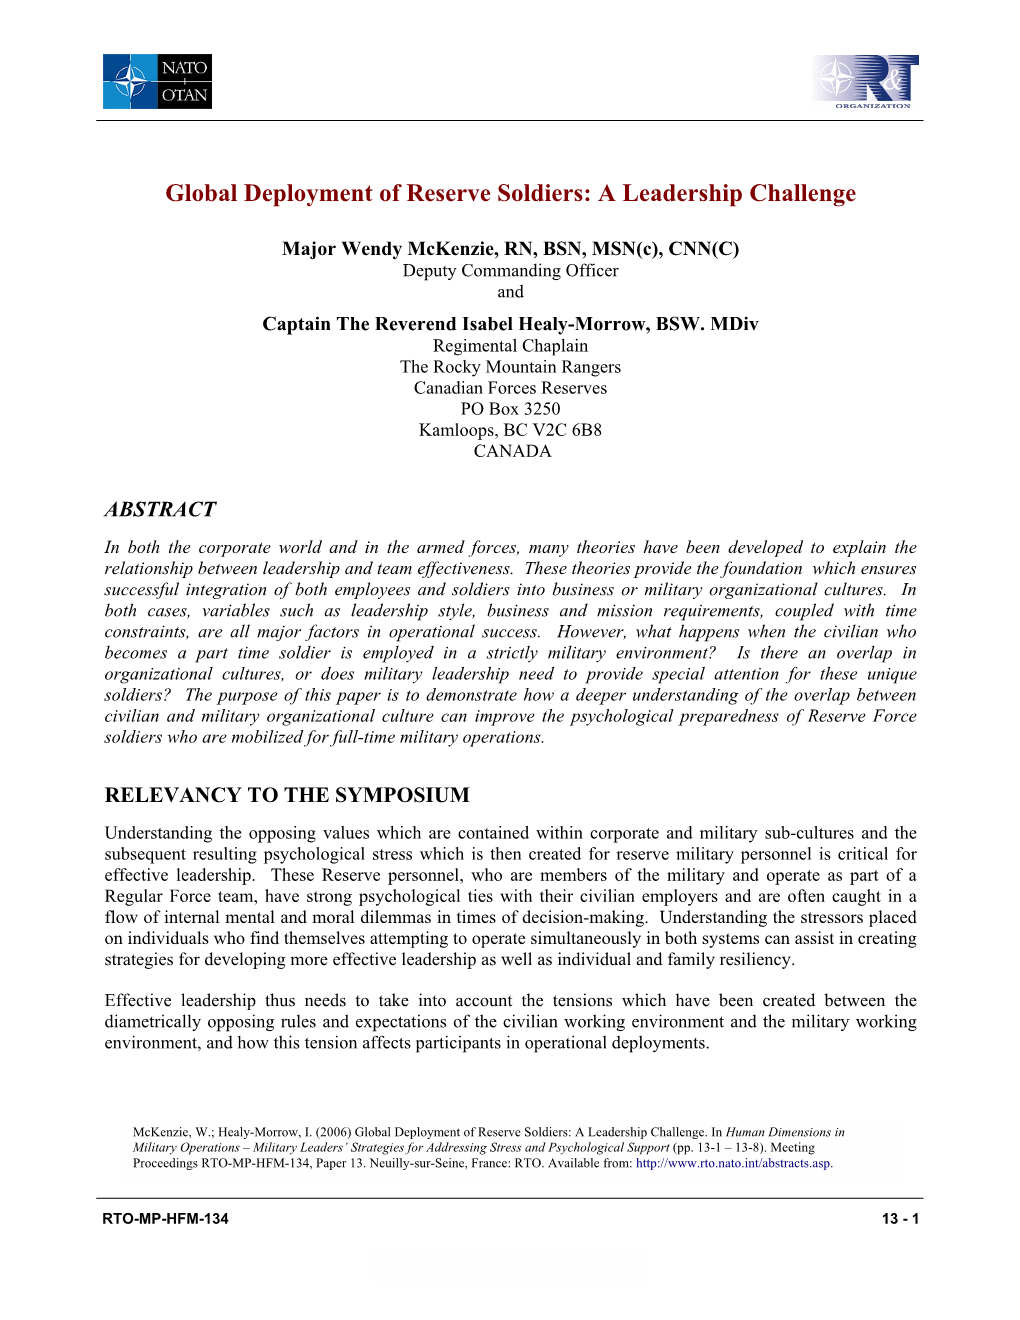 Global Deployment of Reserve Soldiers: a Leadership Challenge